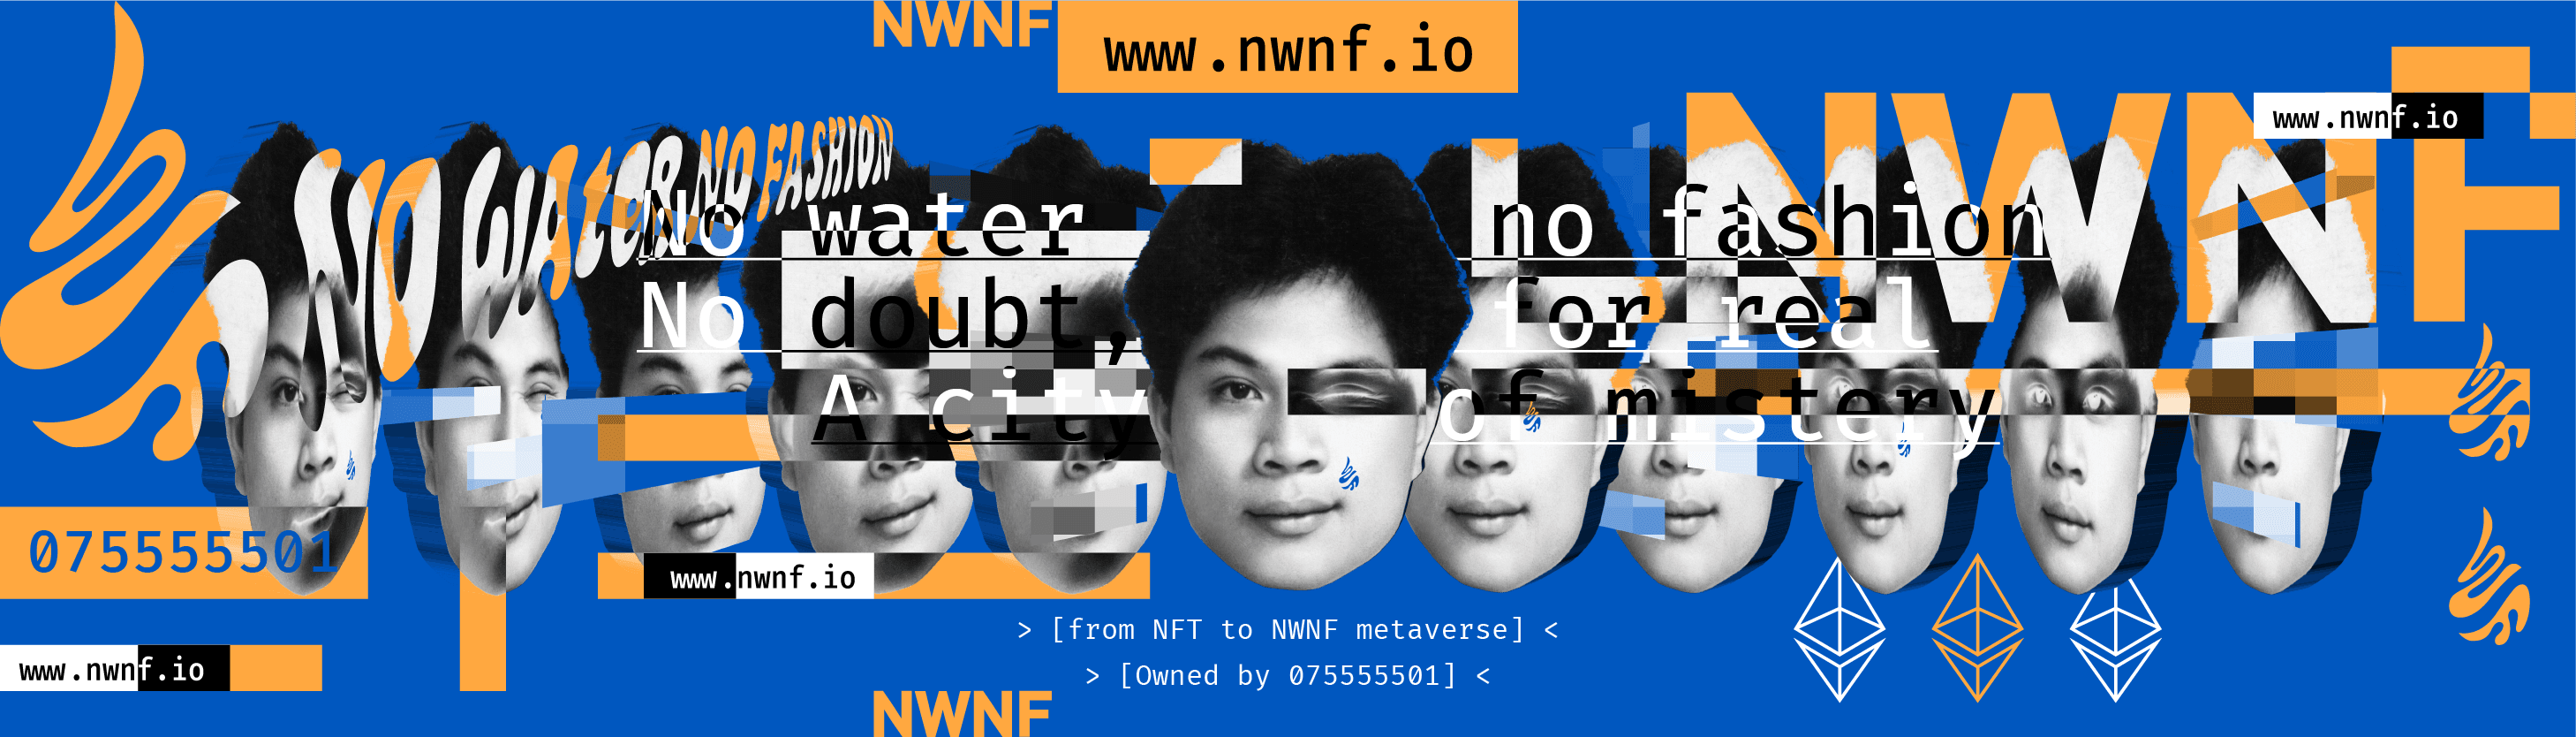 NWNF banner